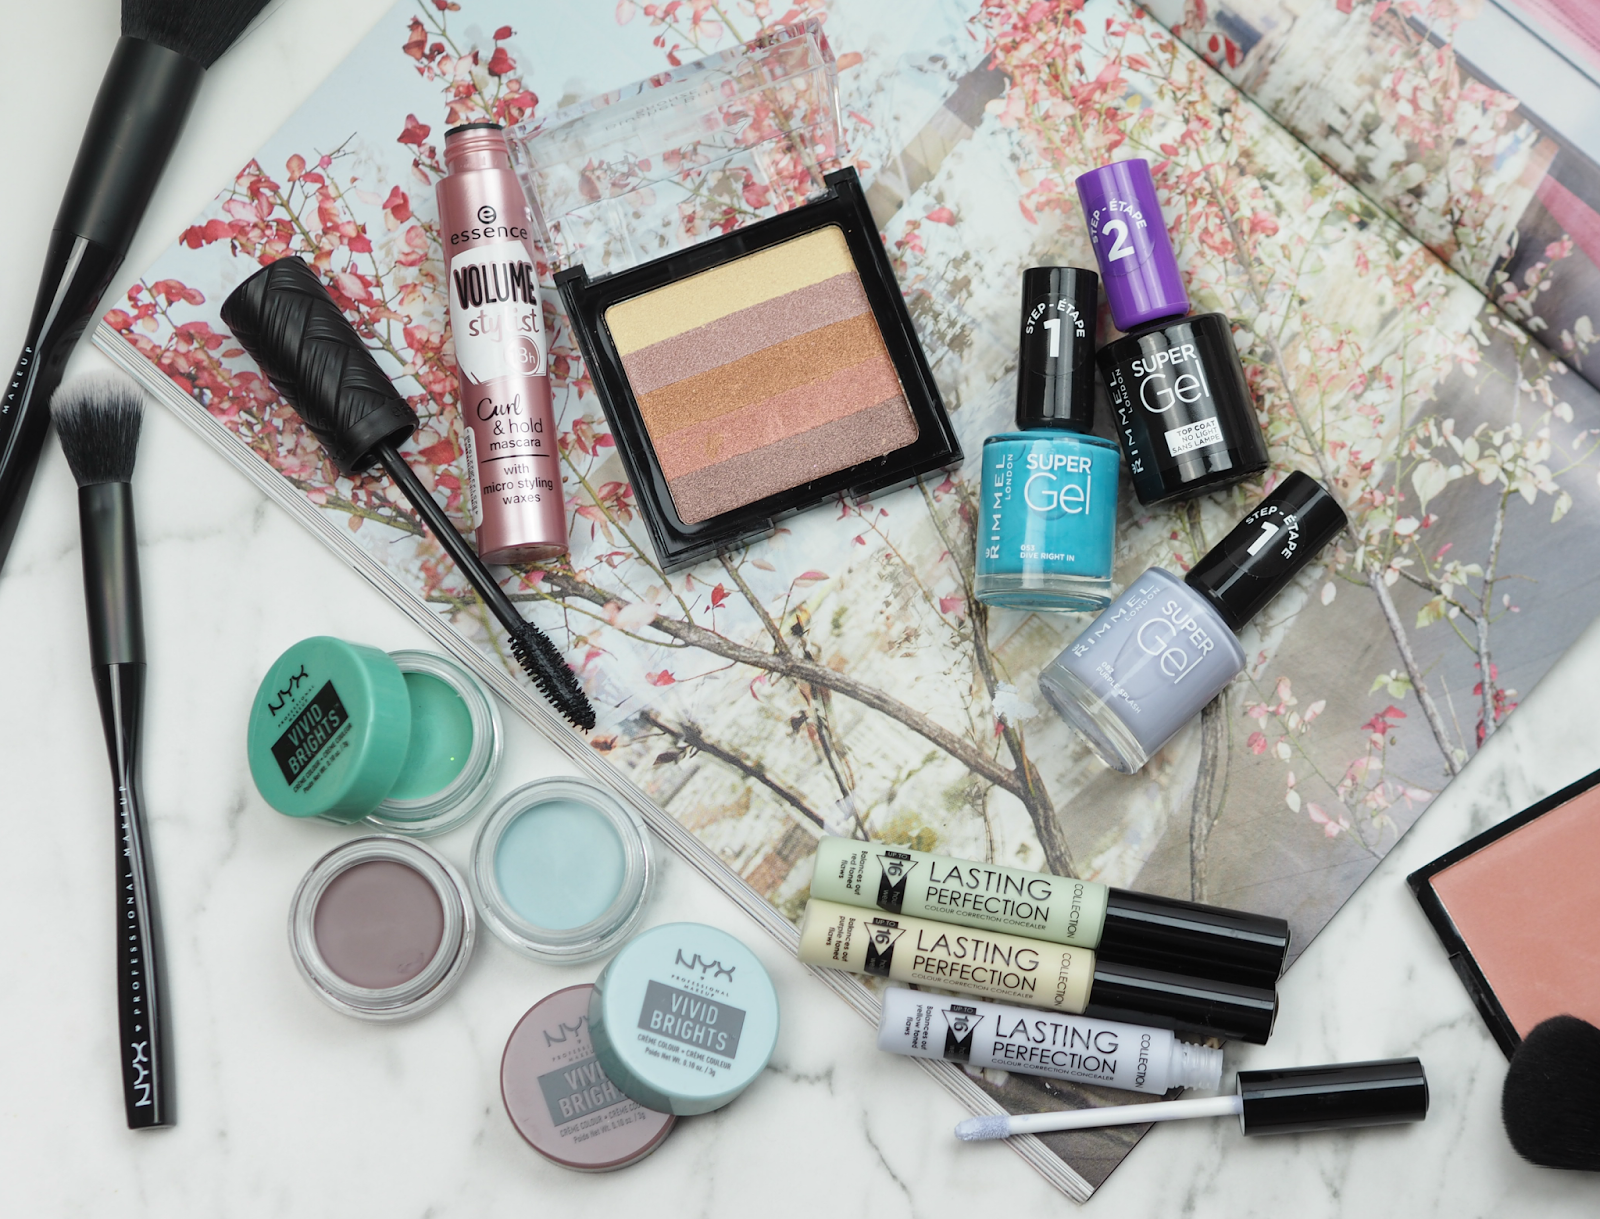 Five Budget Makeup Buys (All Under £6.00) Both You & Your Purse Will Love For Spring